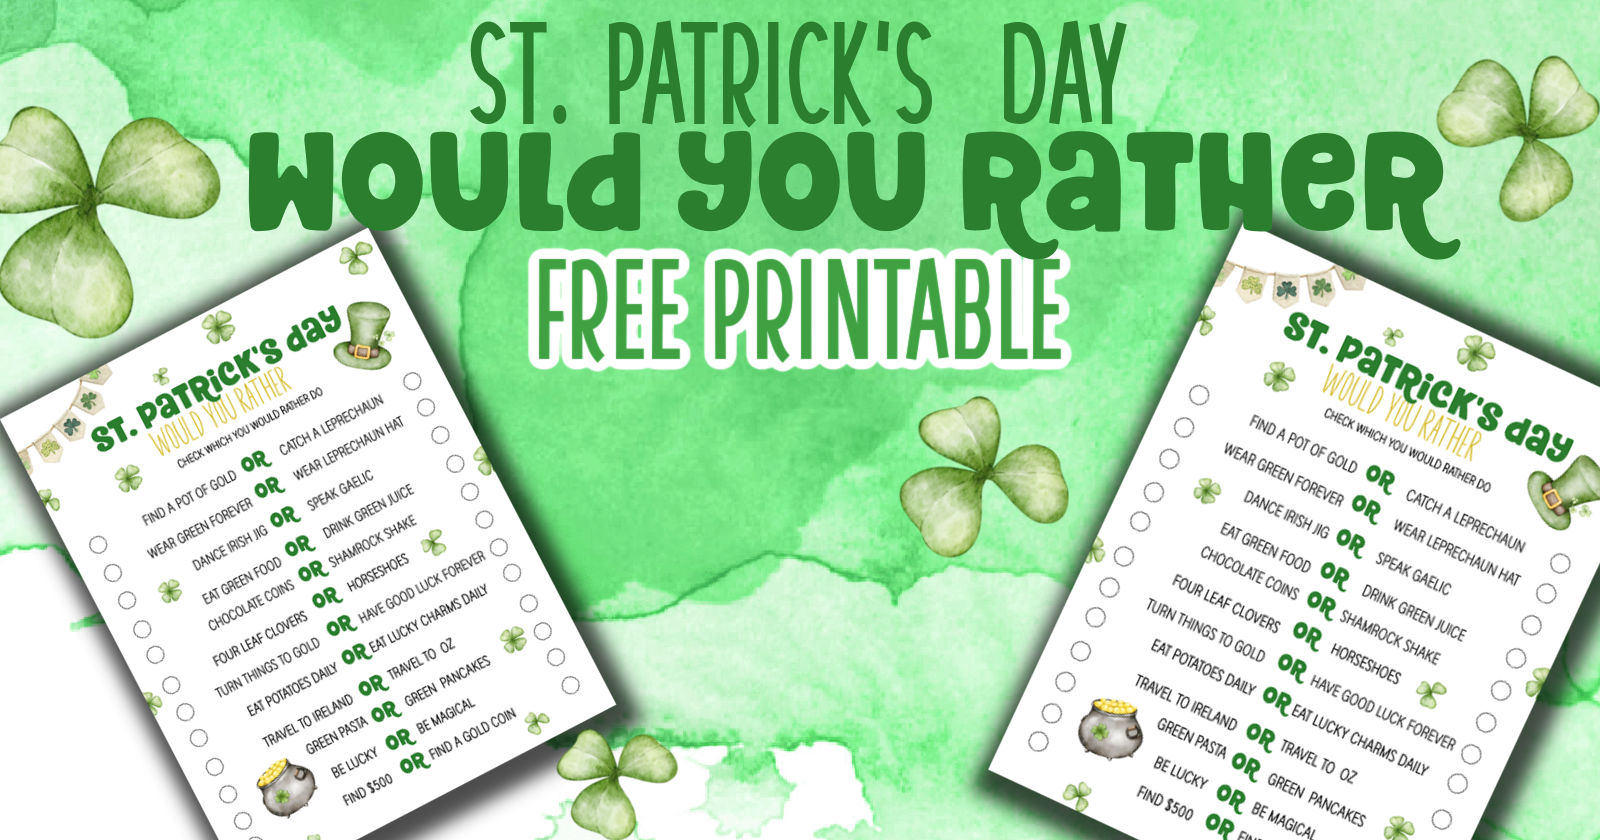 St. Patrick's Day worksheets with would you rather questions for kids